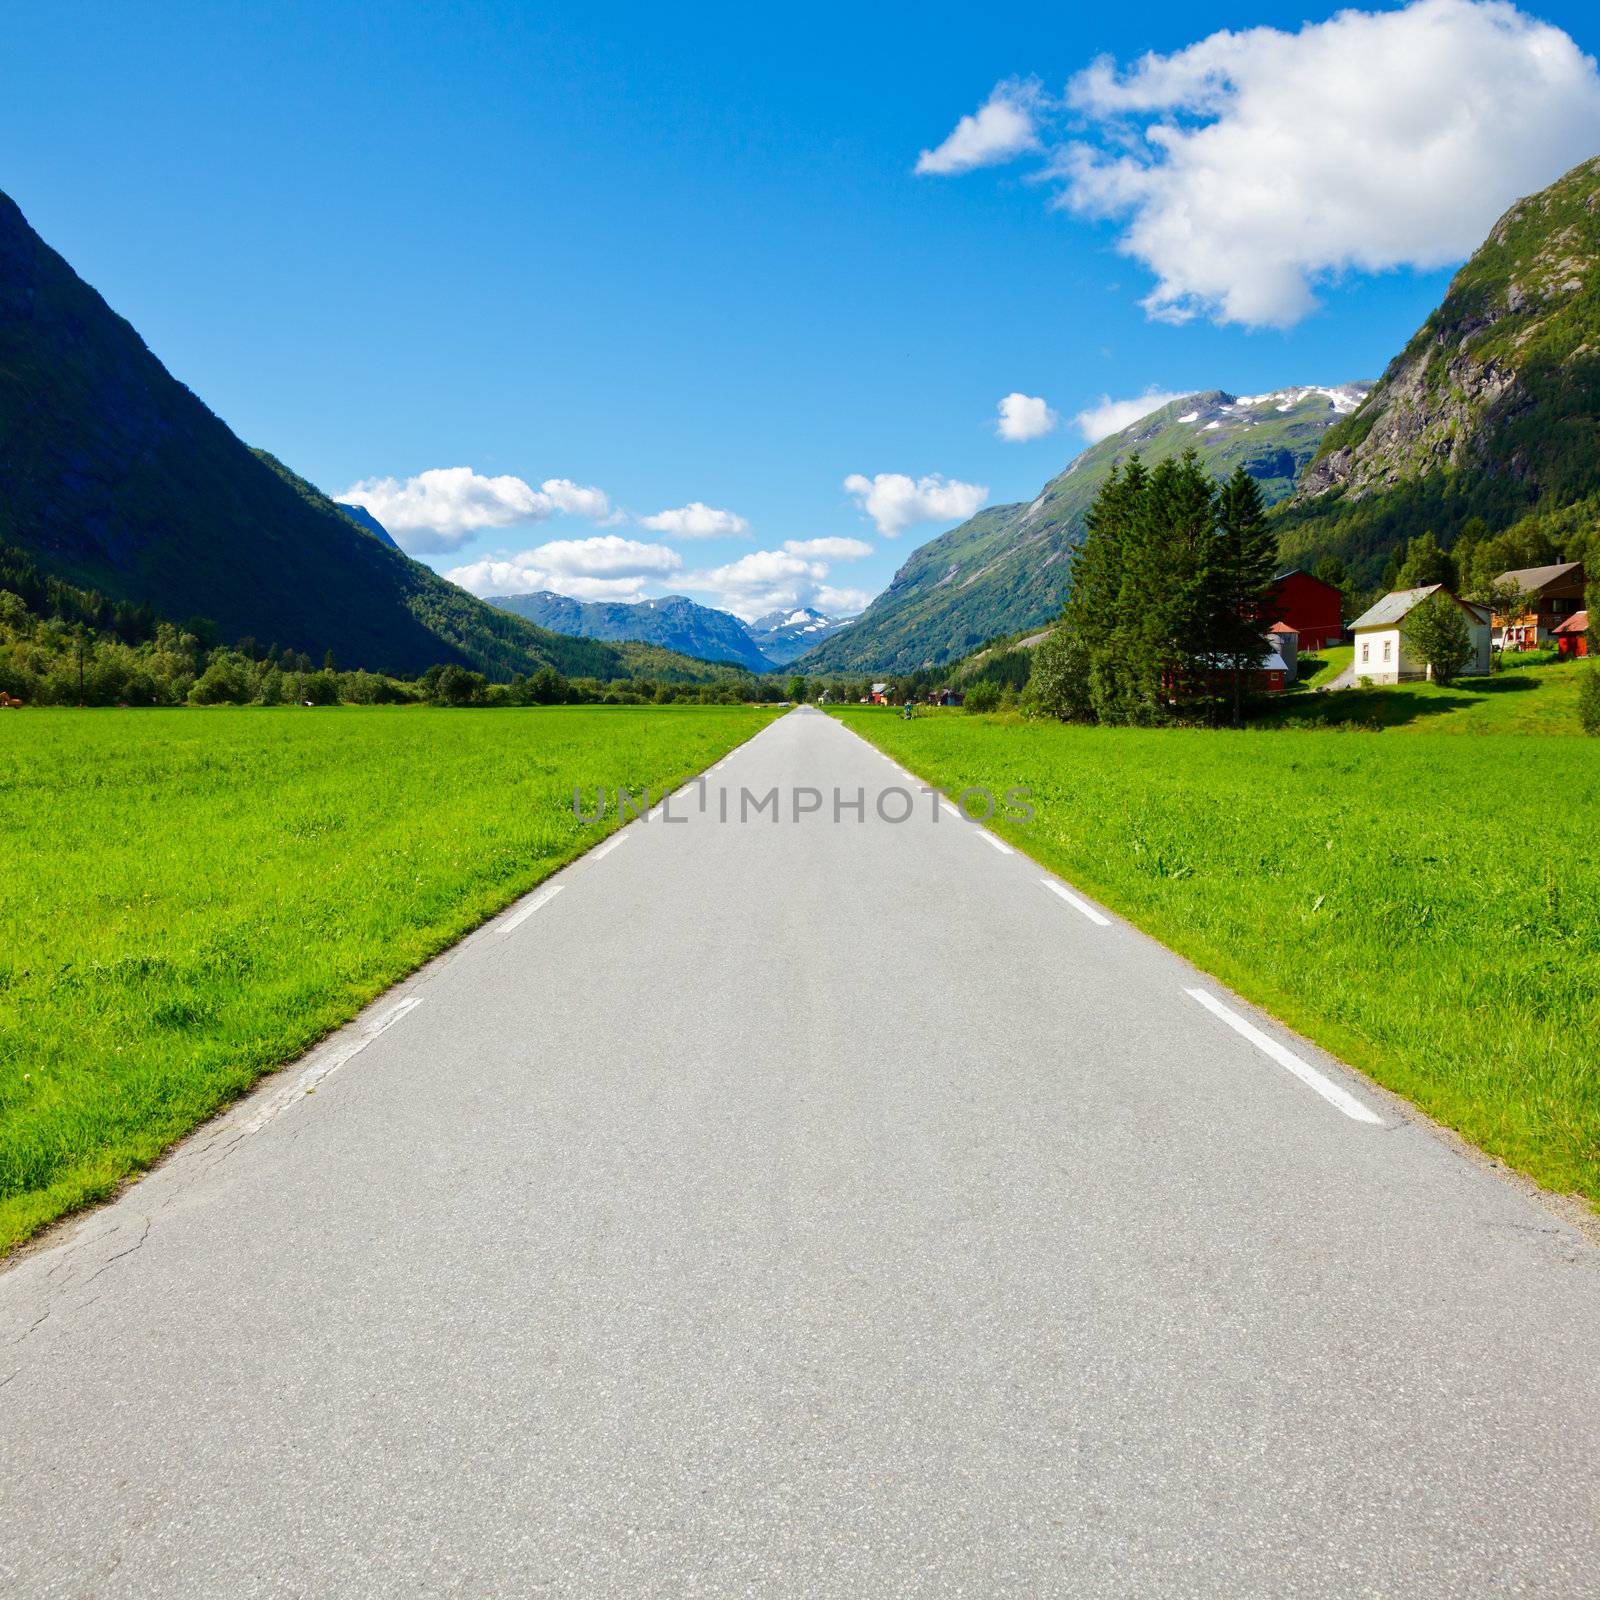 Scenic one lane asphalt road leads through mountain valley in Norway